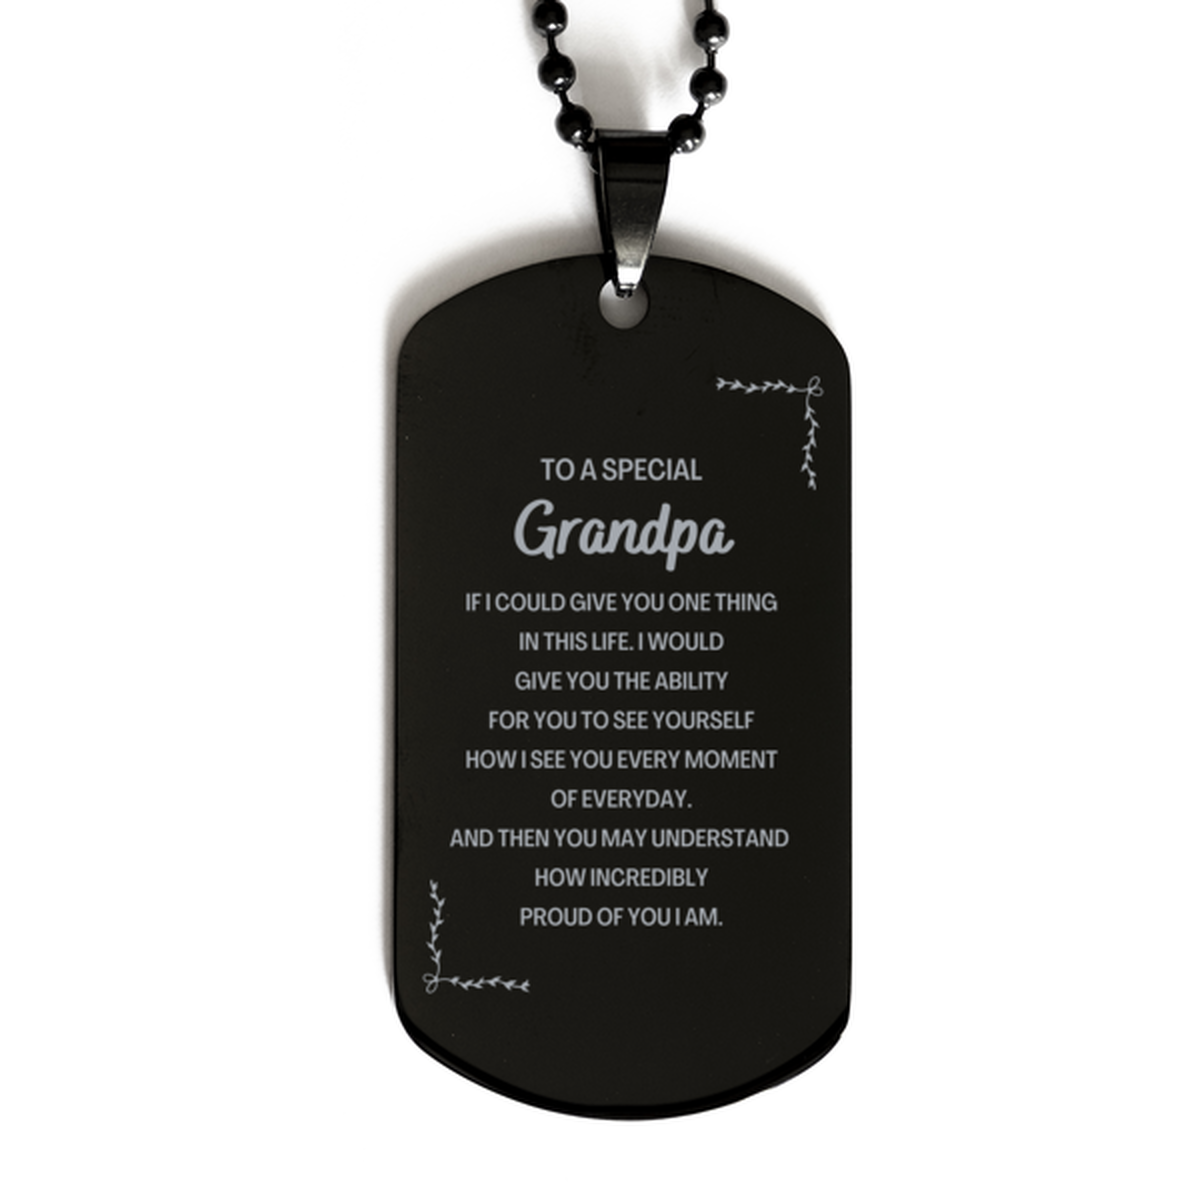 To My Grandpa Black Dog Tag, Gifts For Grandpa Engraved, Inspirational Gifts for Christmas Birthday, Epic Gifts for Grandpa To A Special Grandpa how incredibly proud of you I am